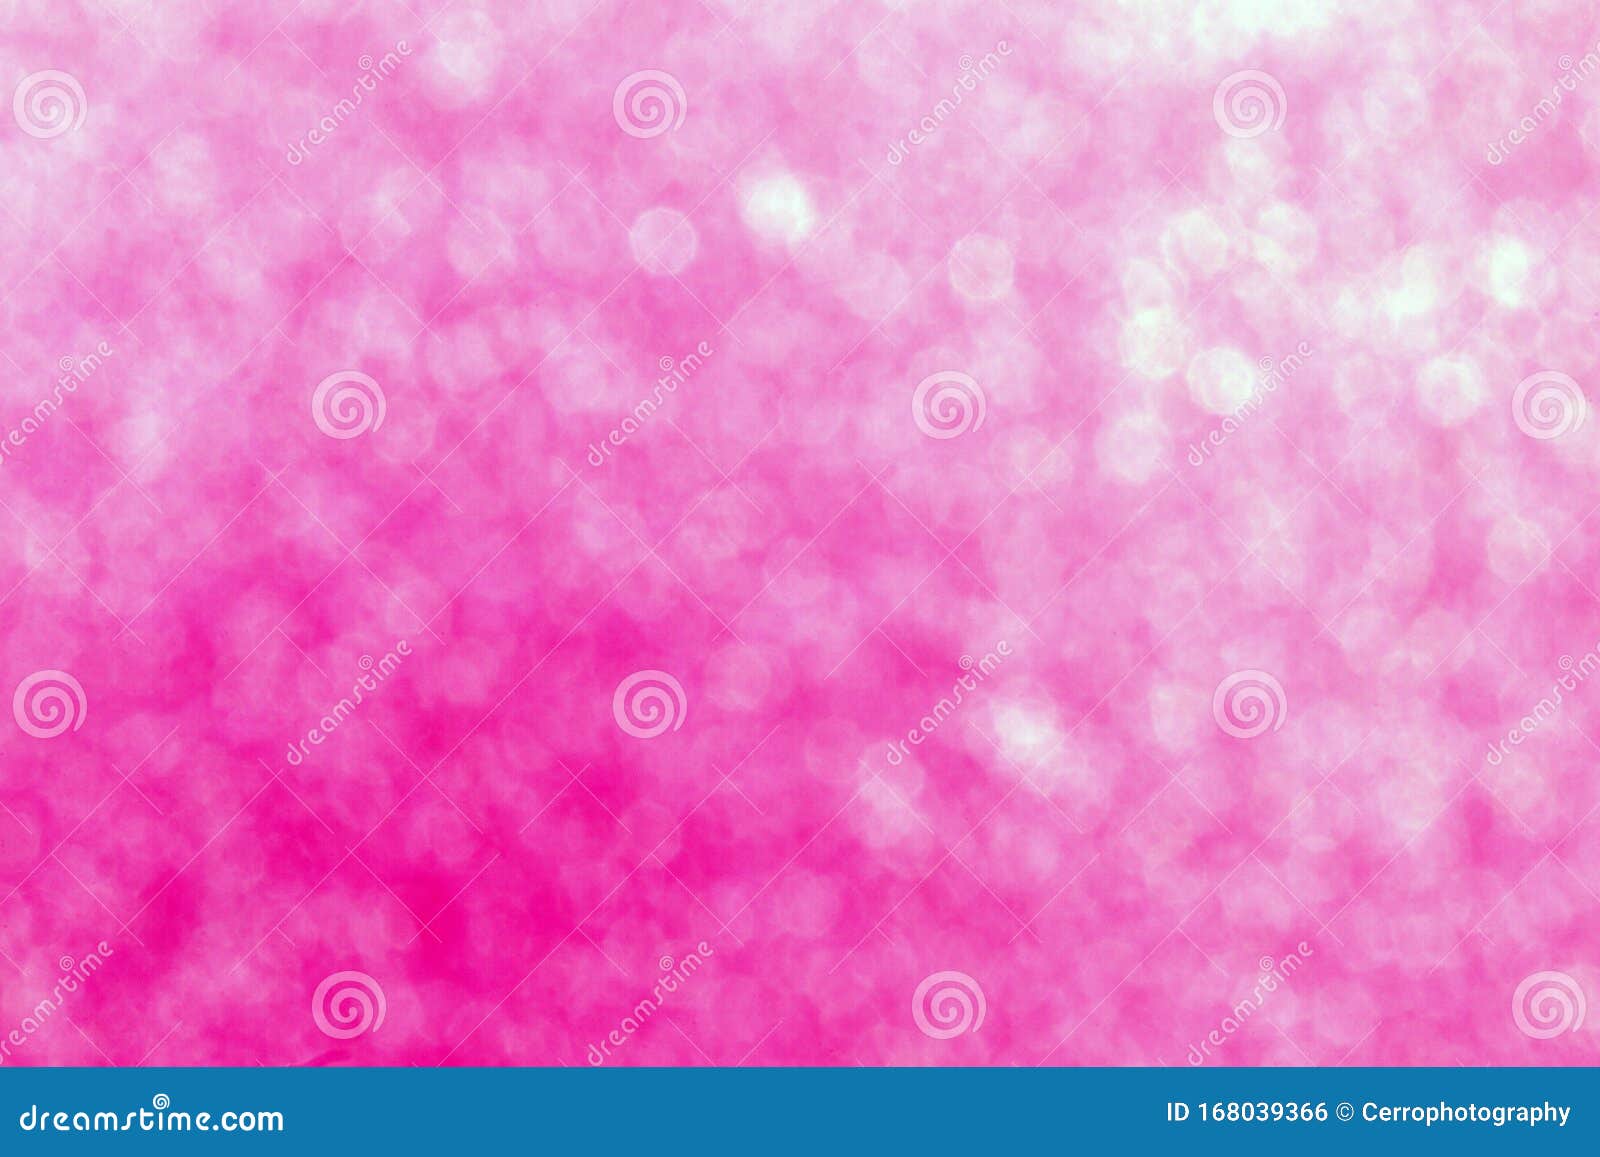 Abstract Pink Glitter Sparkle Confetti Background or Invitation for ...